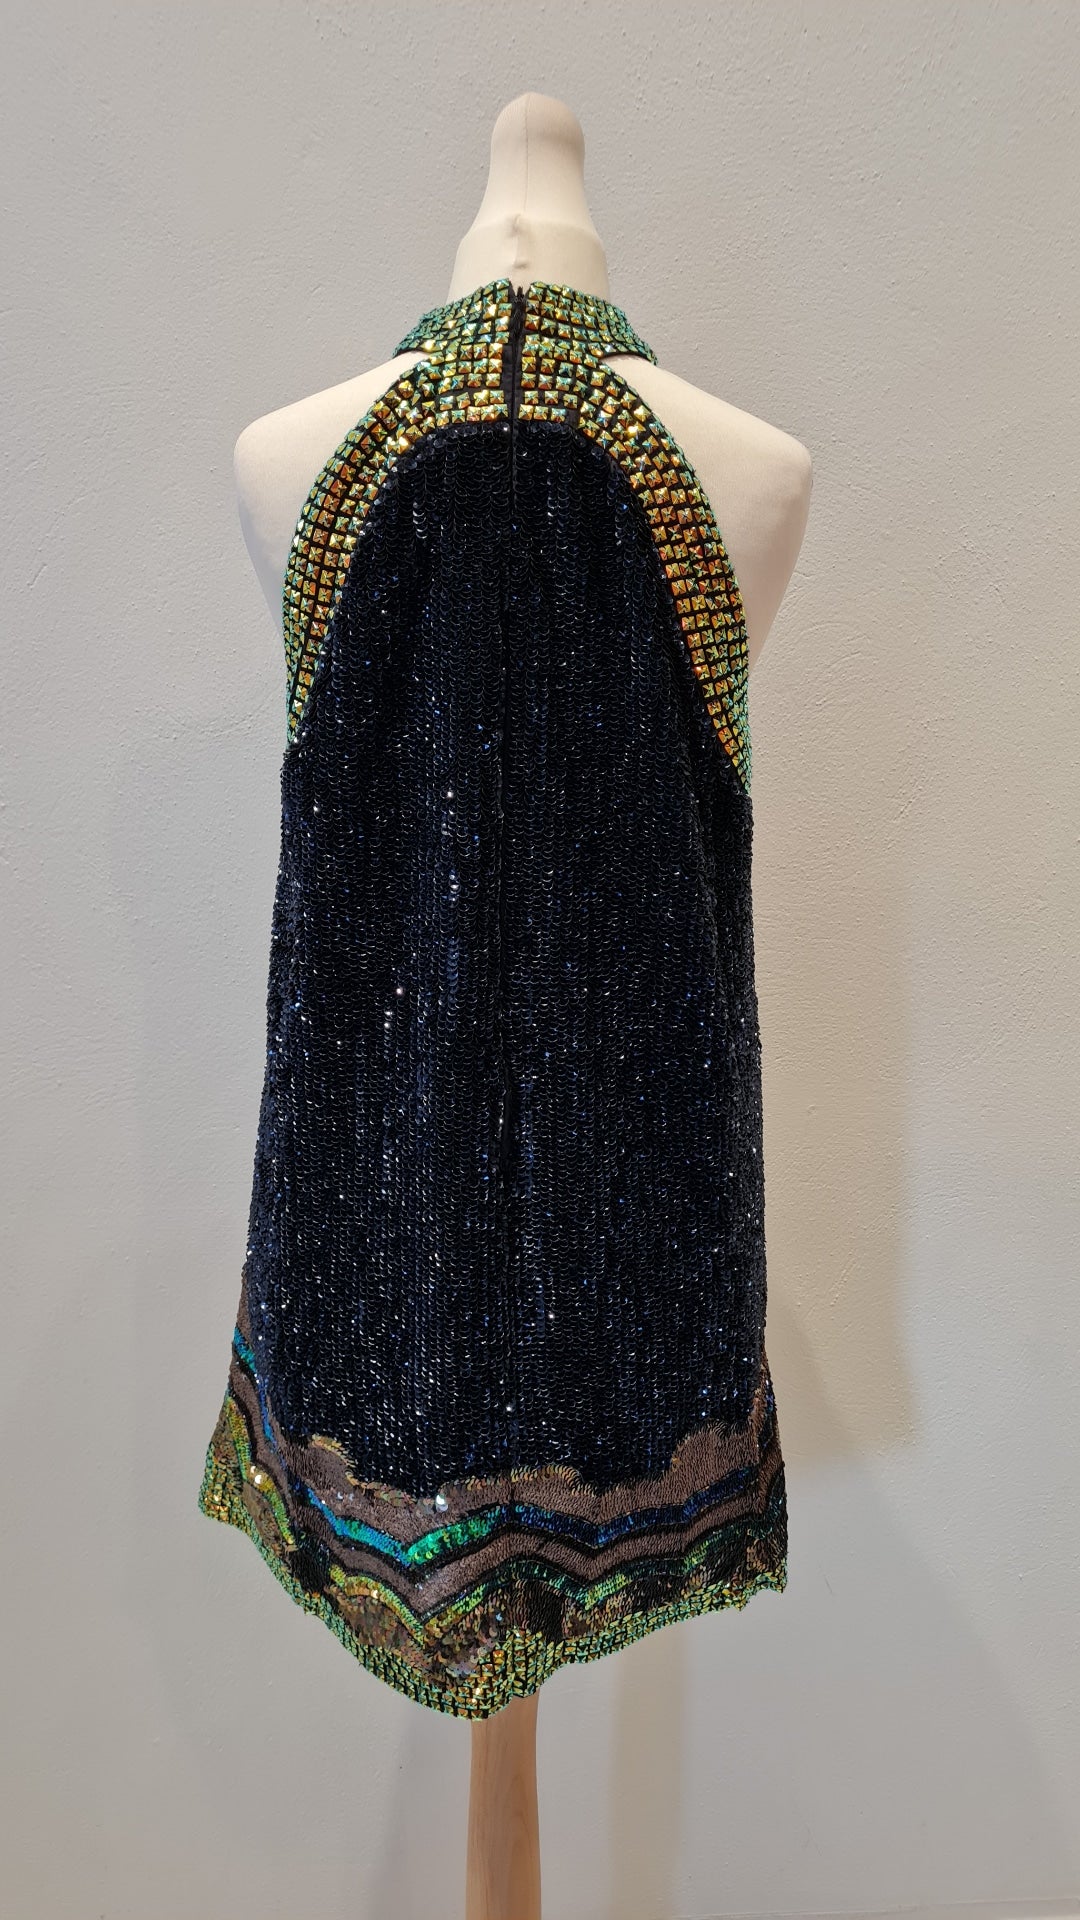 French Connection Navy Sequin Gold Studded Dress Size 10 (new)